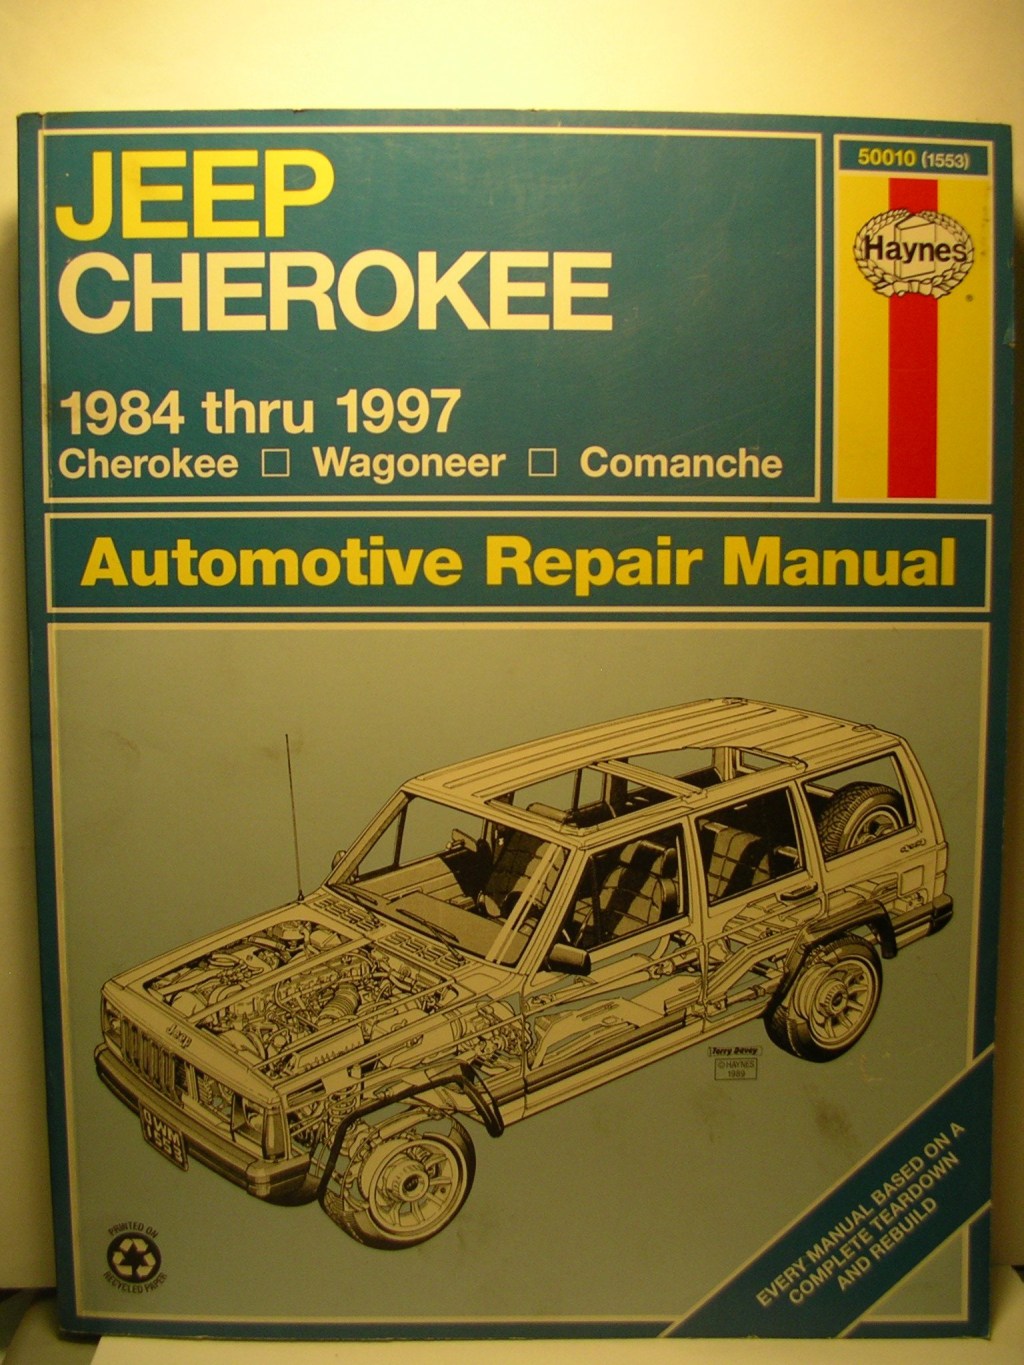 Picture of: Jeep Cherokee, Wagoneer and Comanche (-) Automotive Repair Manual  (Haynes Automotive Repair Manuals)